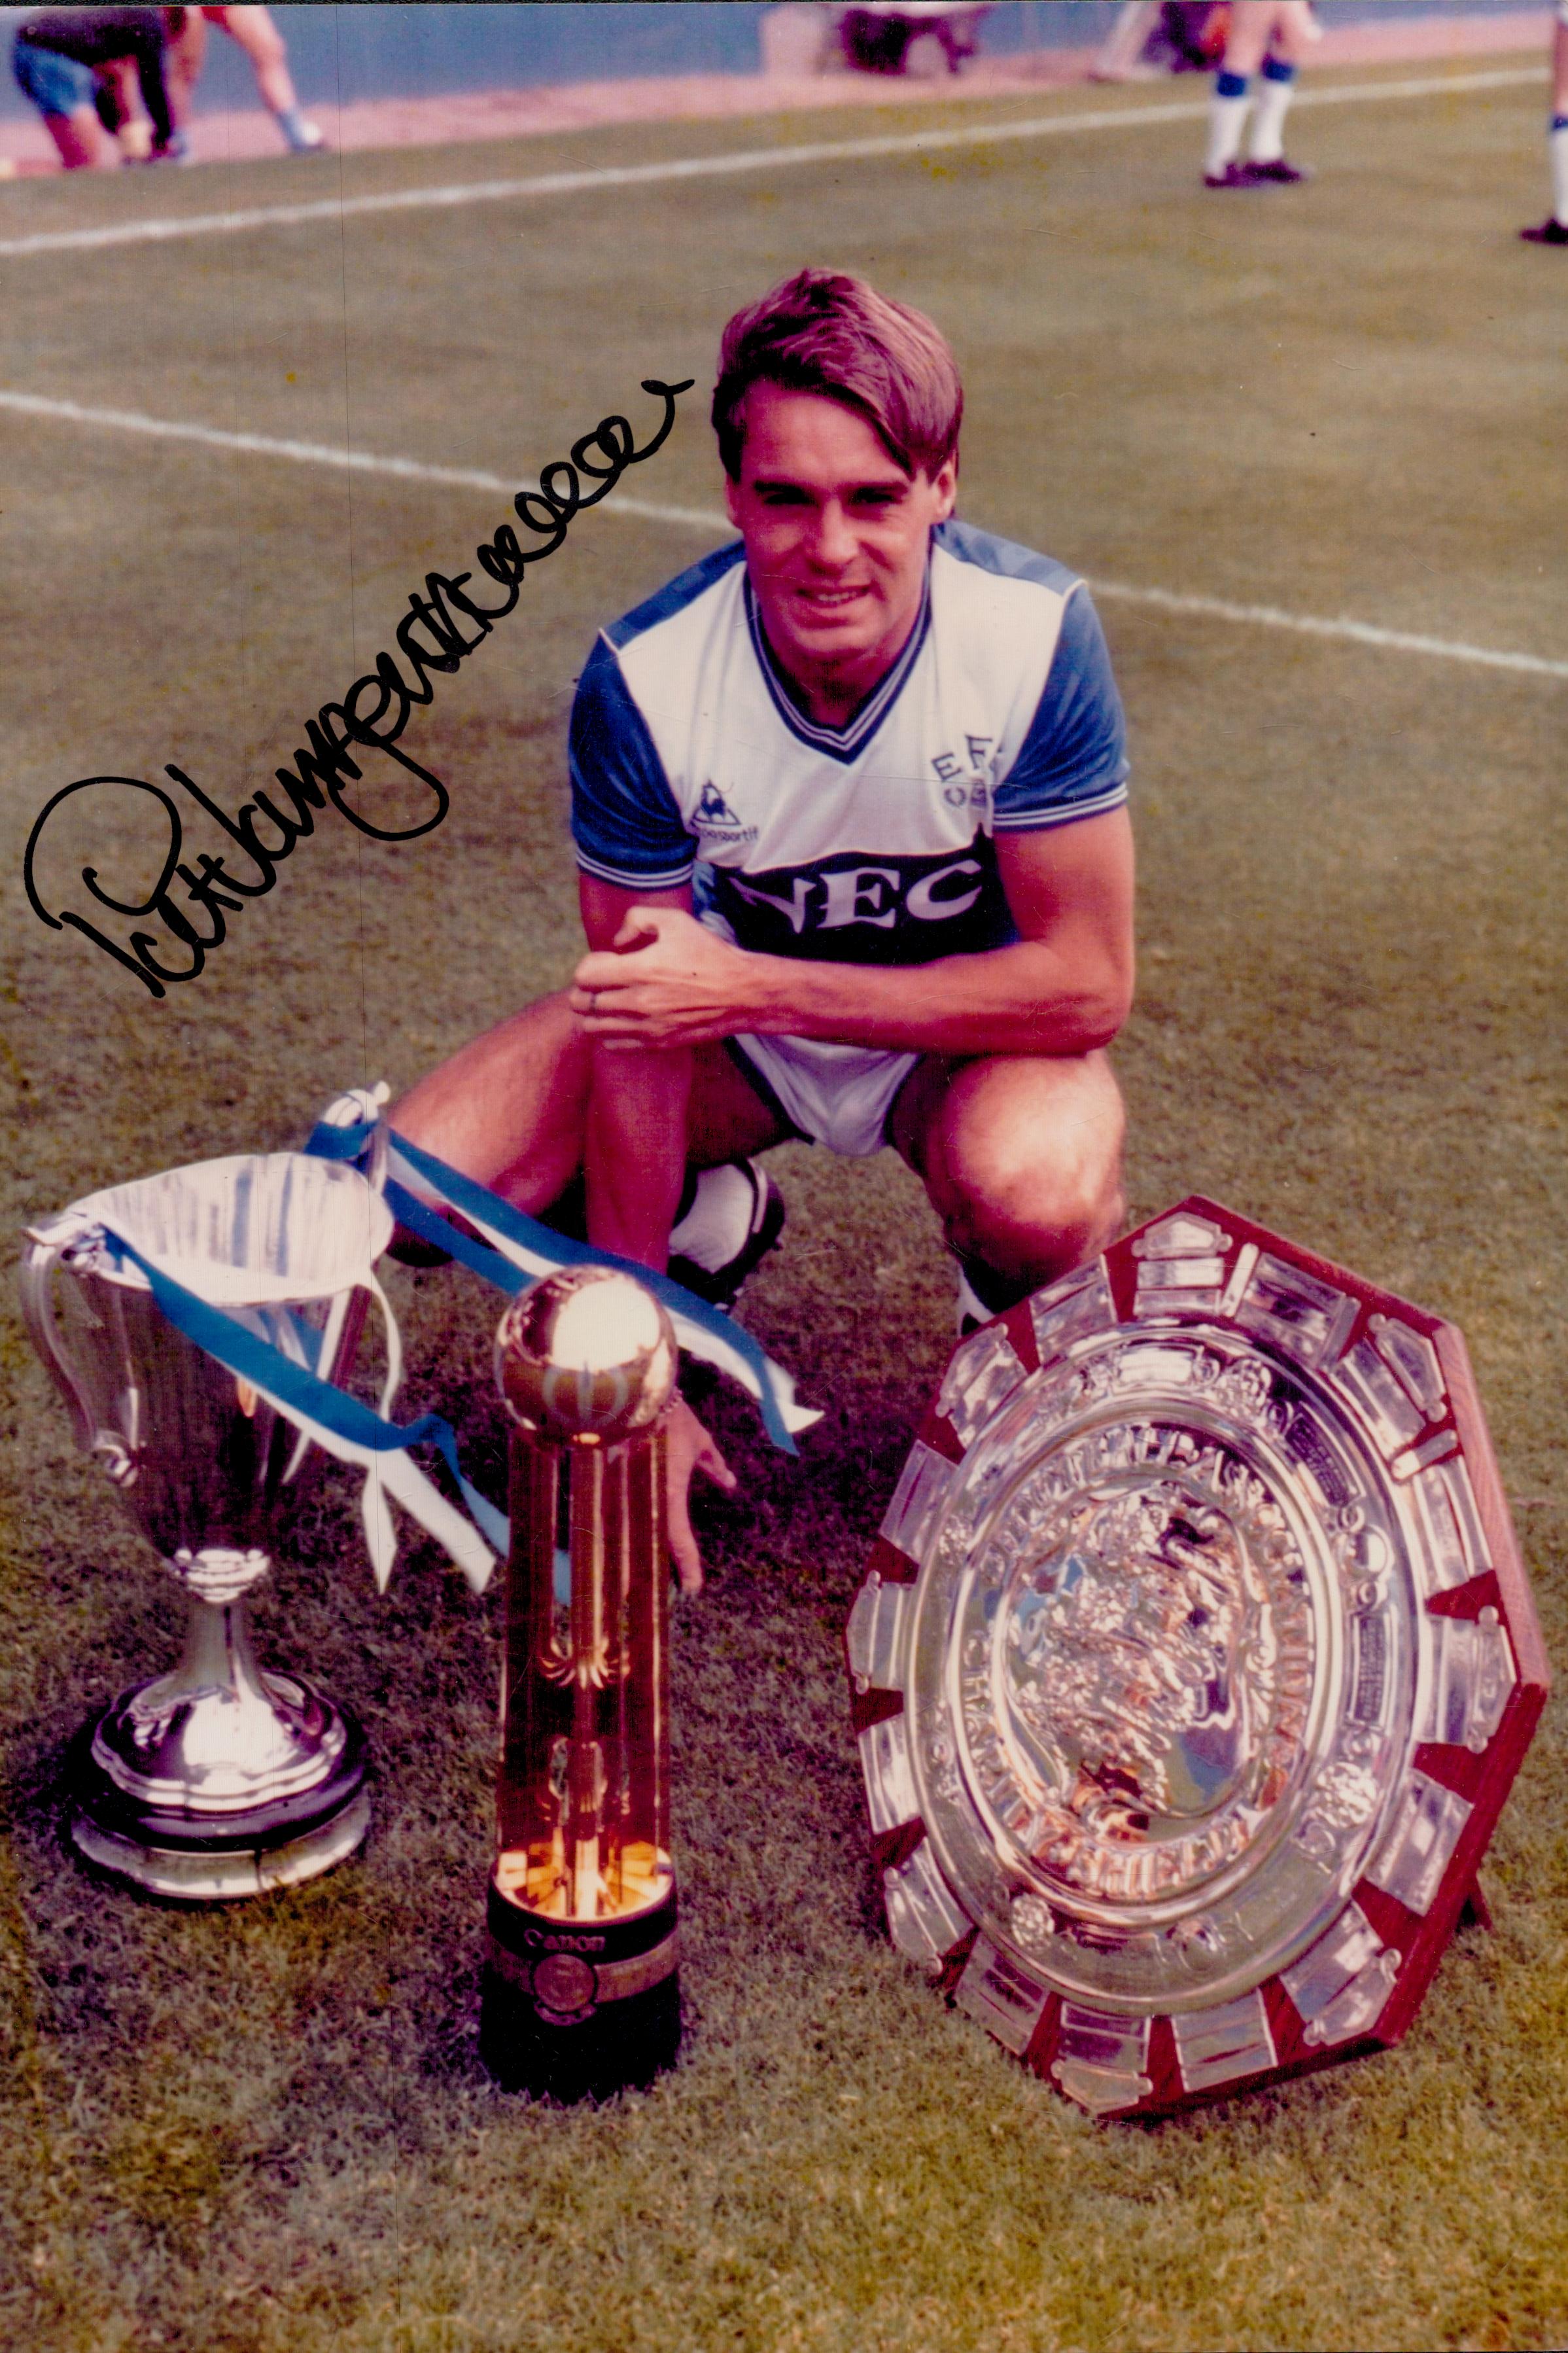 Pat Van Den Hauwe signed 12x8 inch colour photo pictured during his days with Everton. All